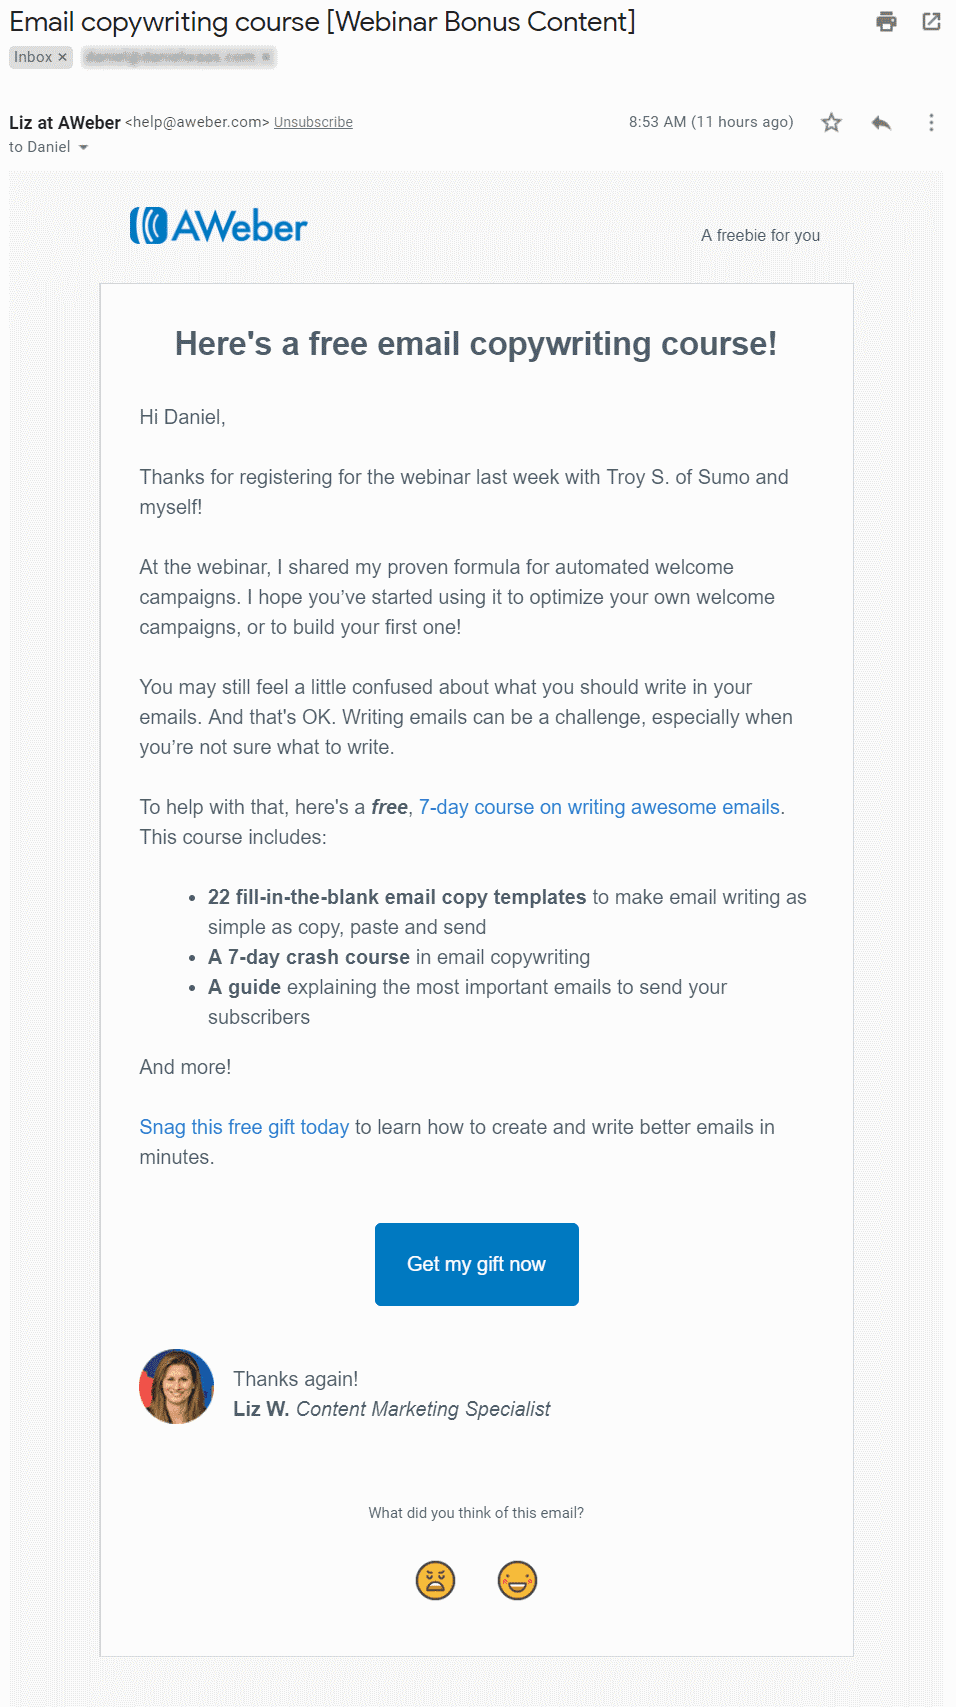 Example of a Webinar Follow-Up Email